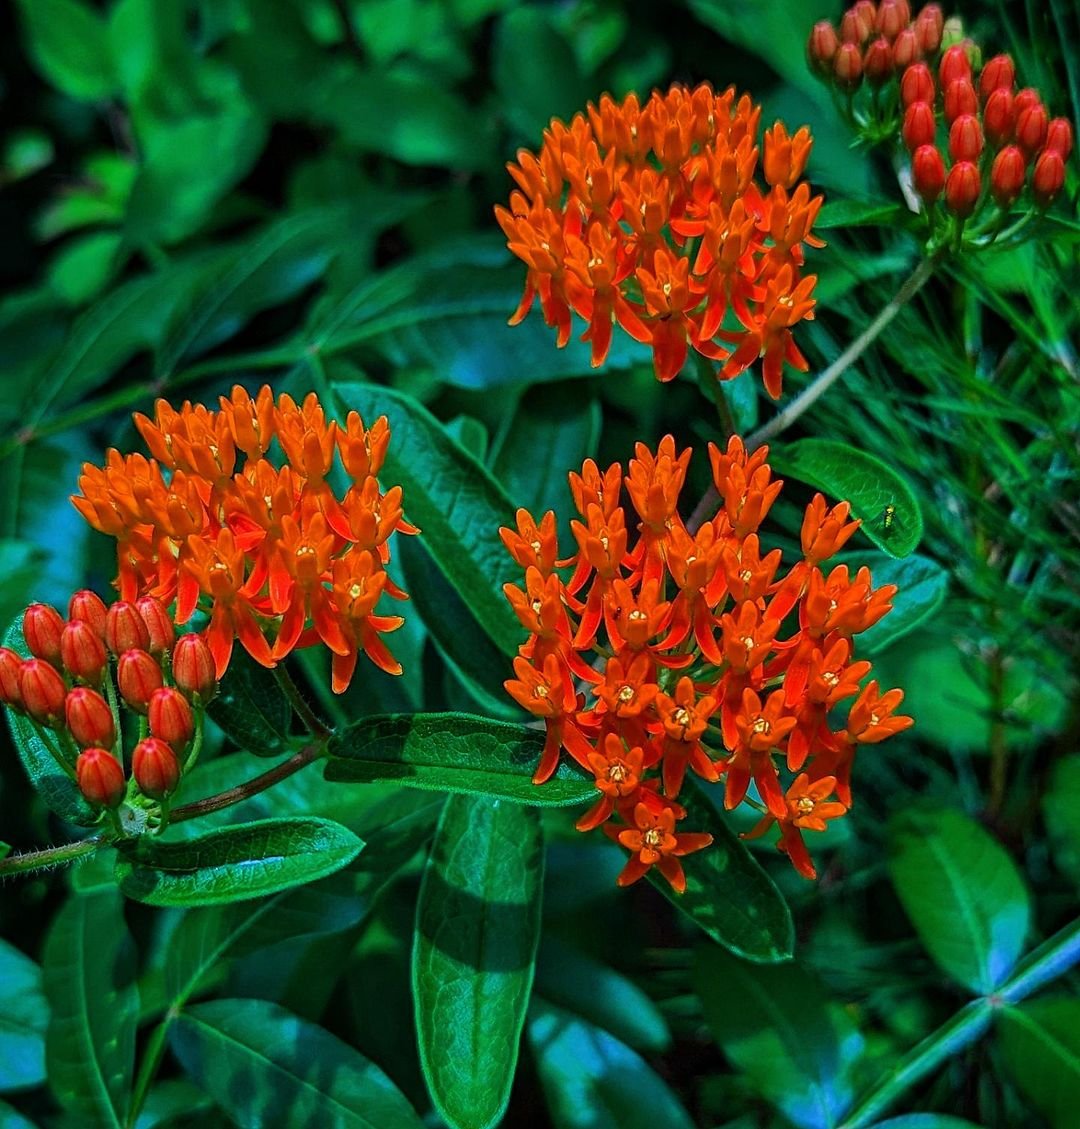 Butterfly Weed (Asclepias tuberosa): Vibrant orange flowers attract butterflies. Green leaves on a tall stem.

